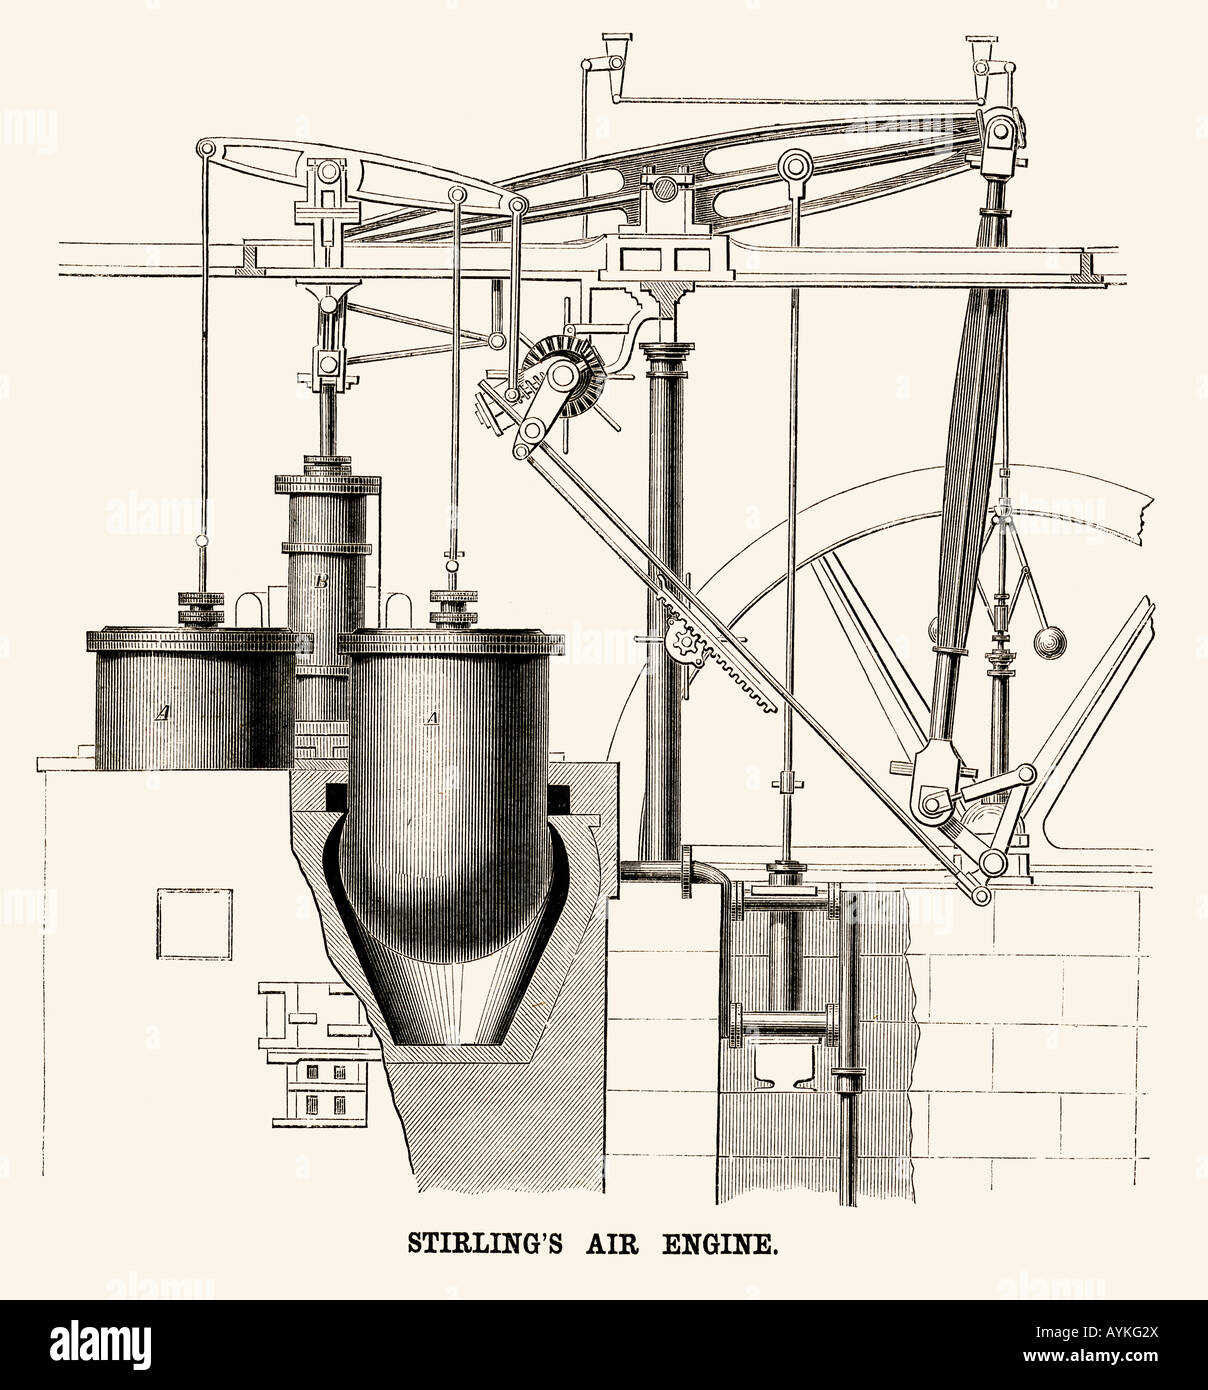 Stirling's Air Engine Stock Photo